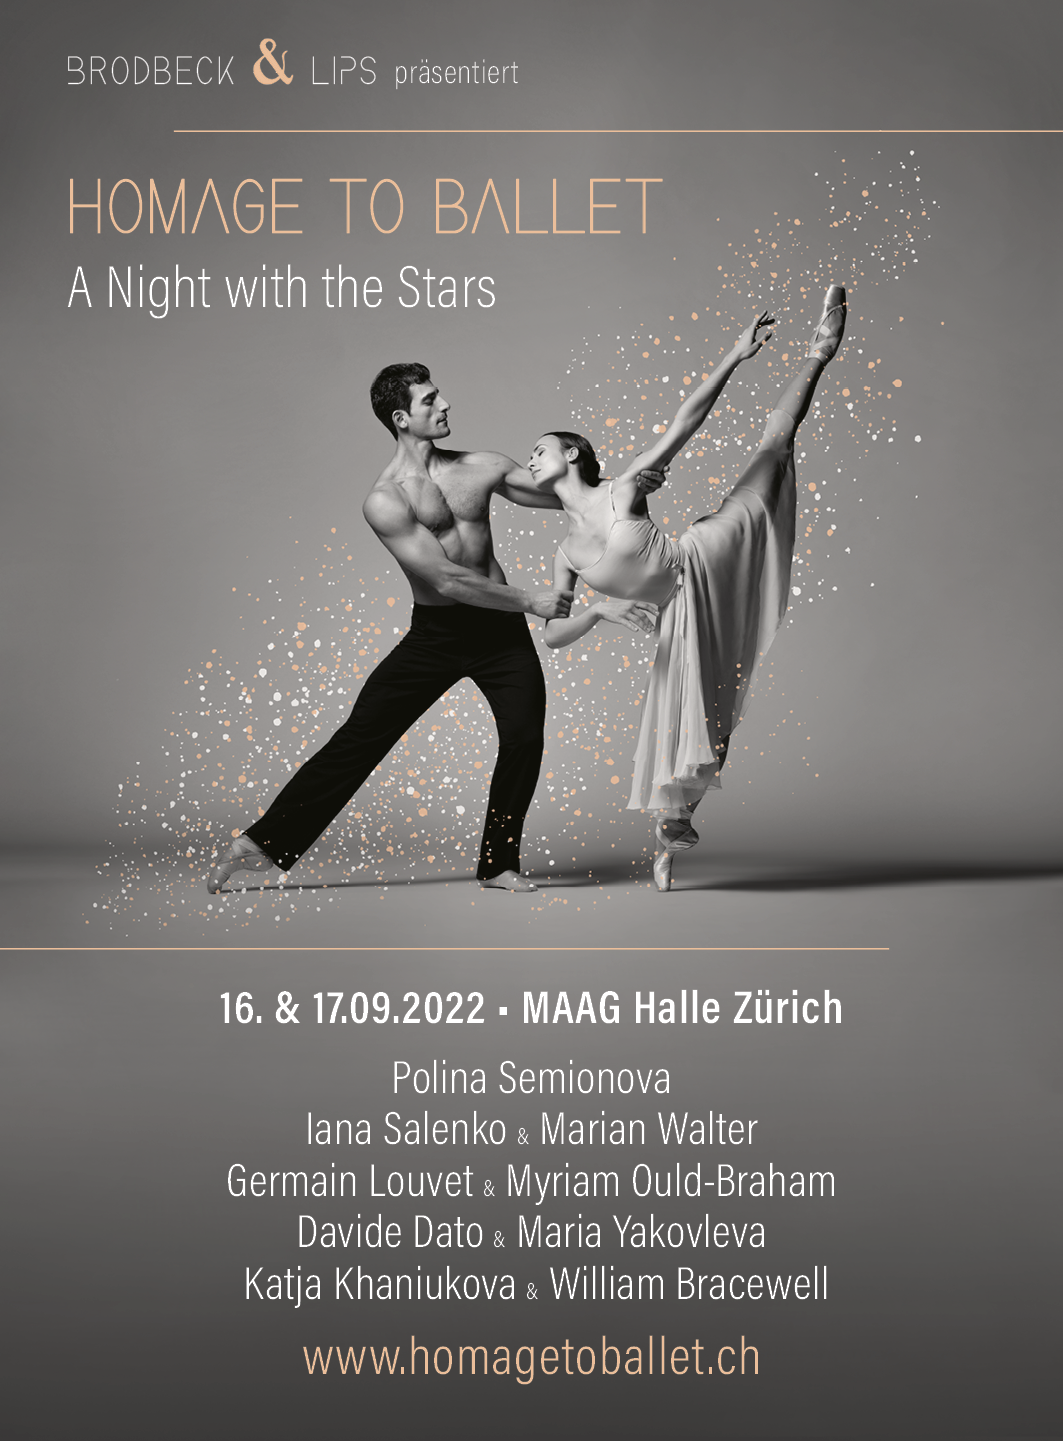 HOMAGE TO BALLET for every ballet lover in Switzerland